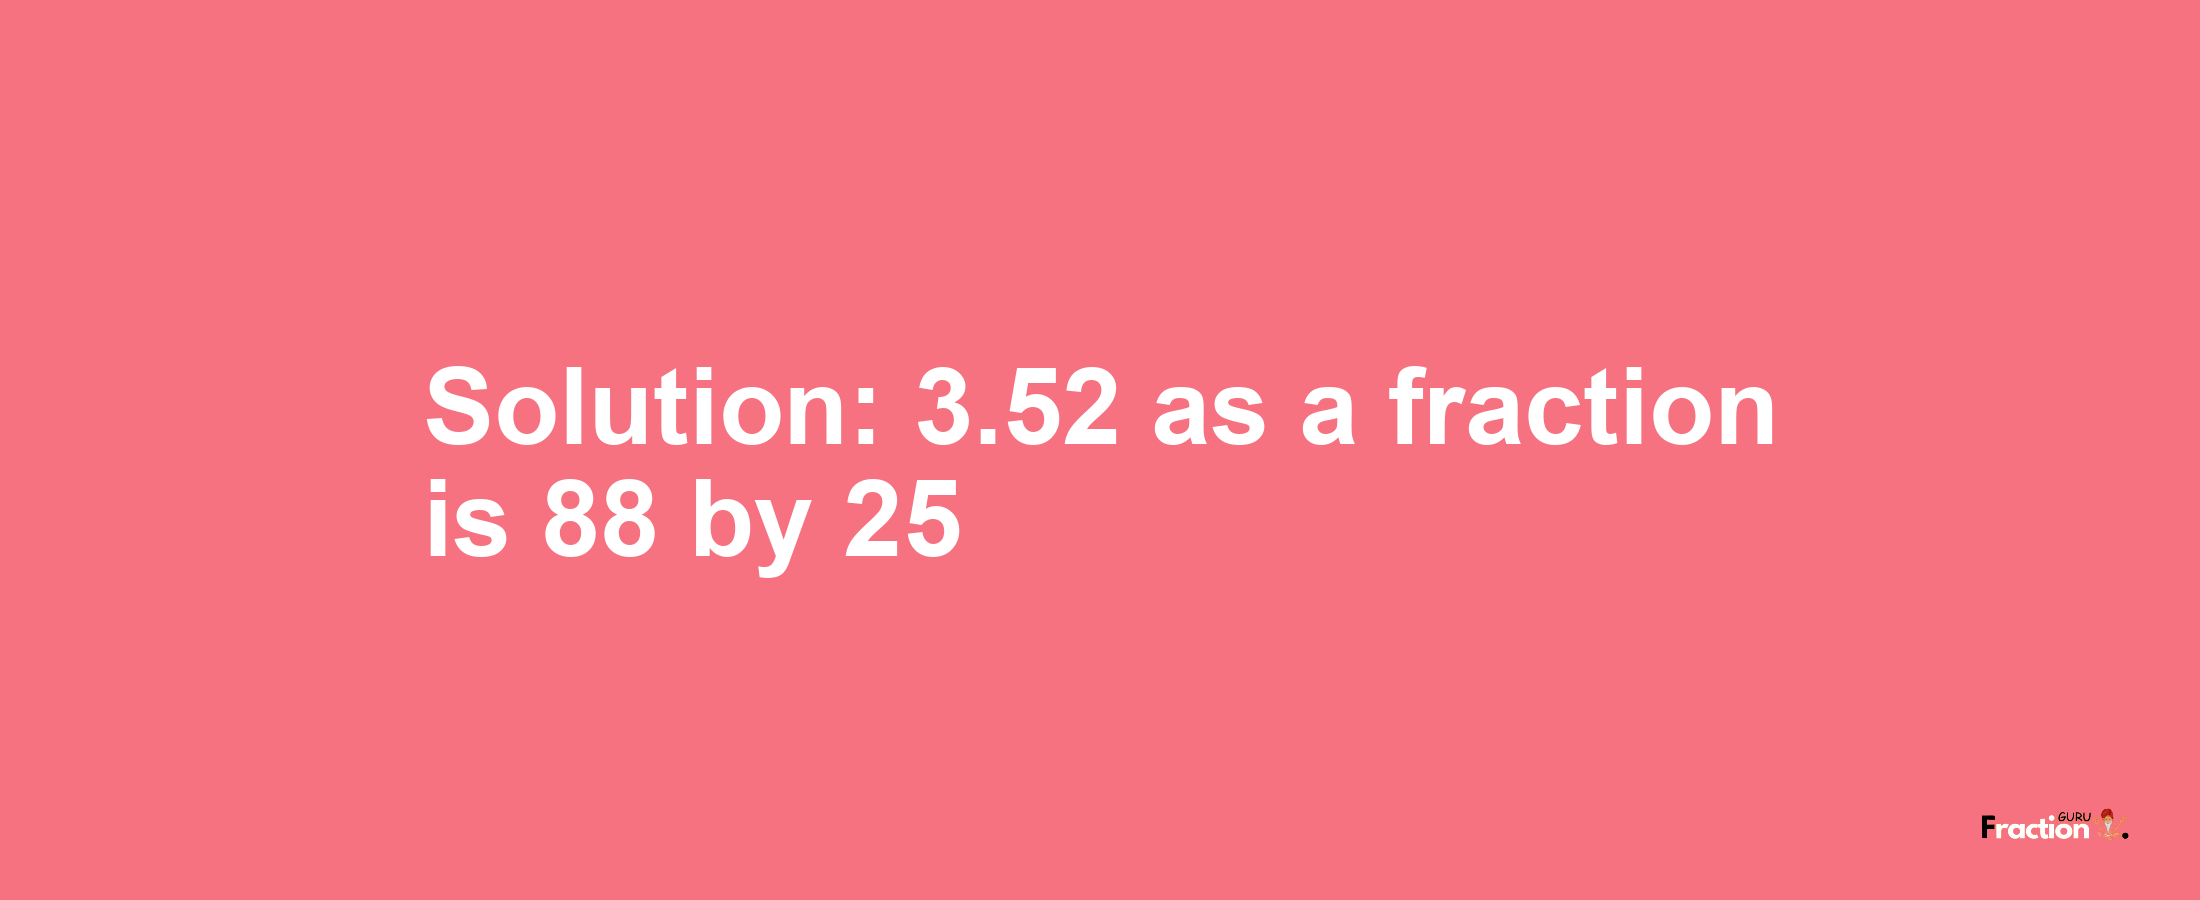 Solution:3.52 as a fraction is 88/25